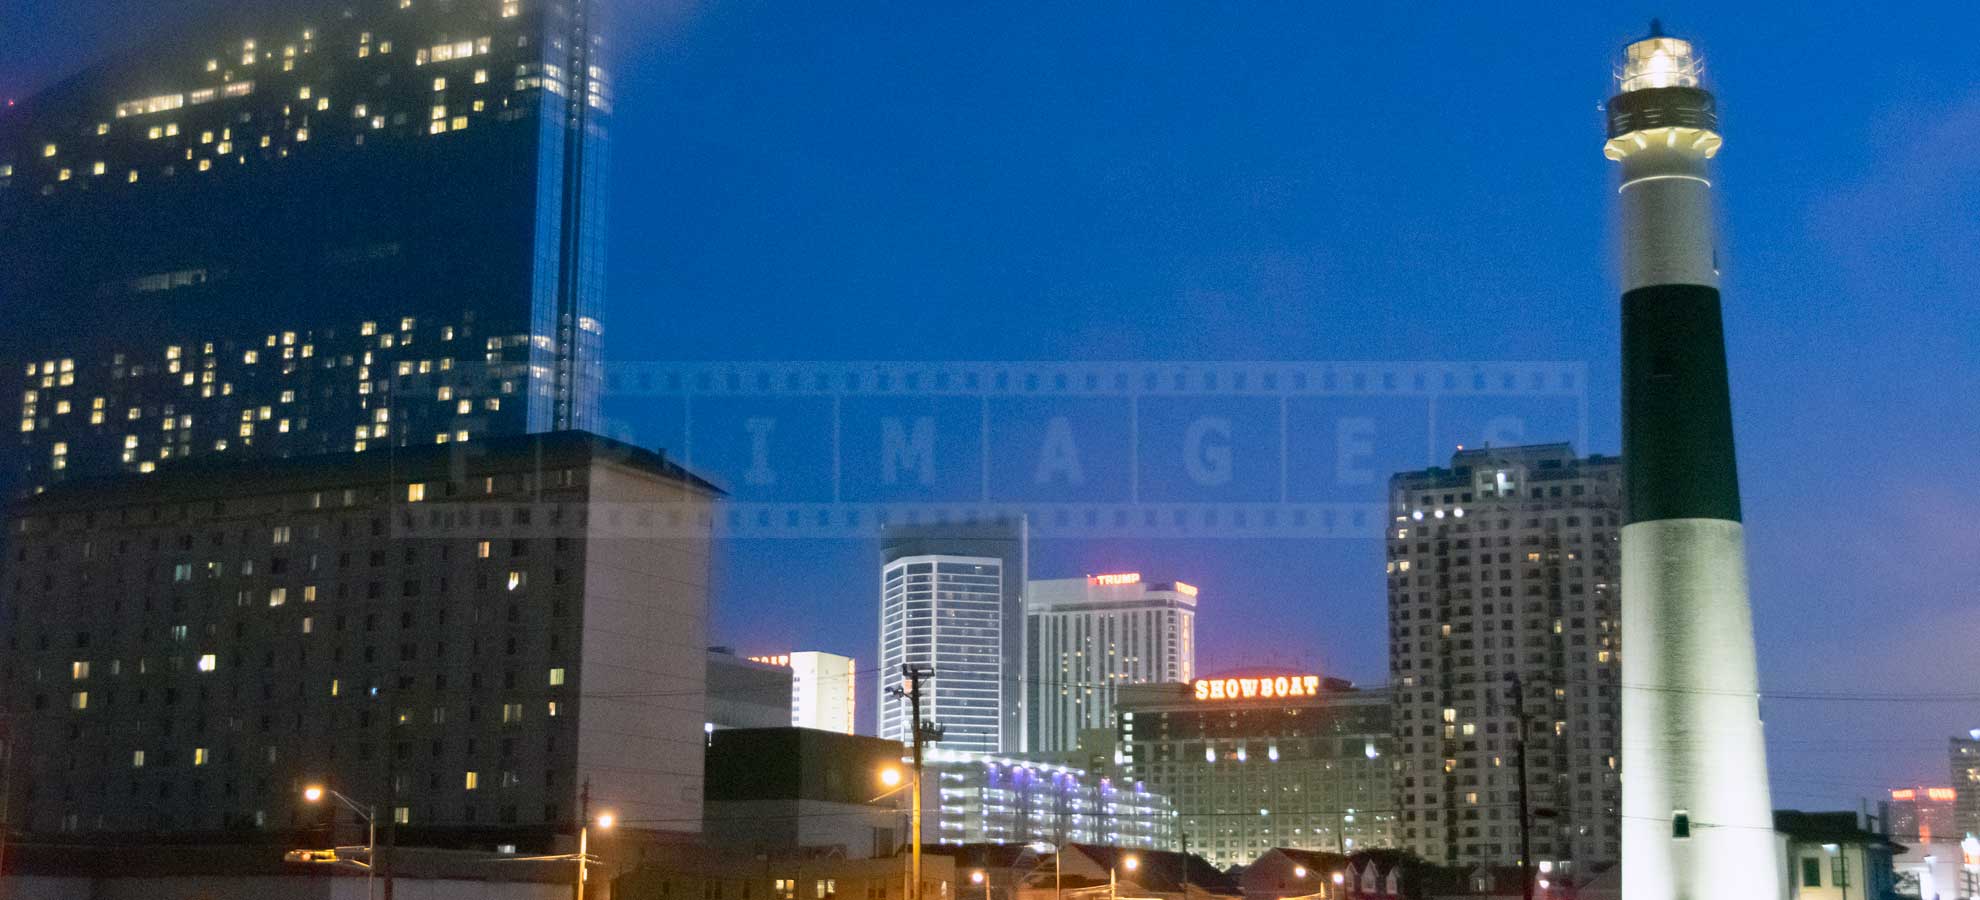 Night view of the Absecon lighthouse and casinos in Atlantic City